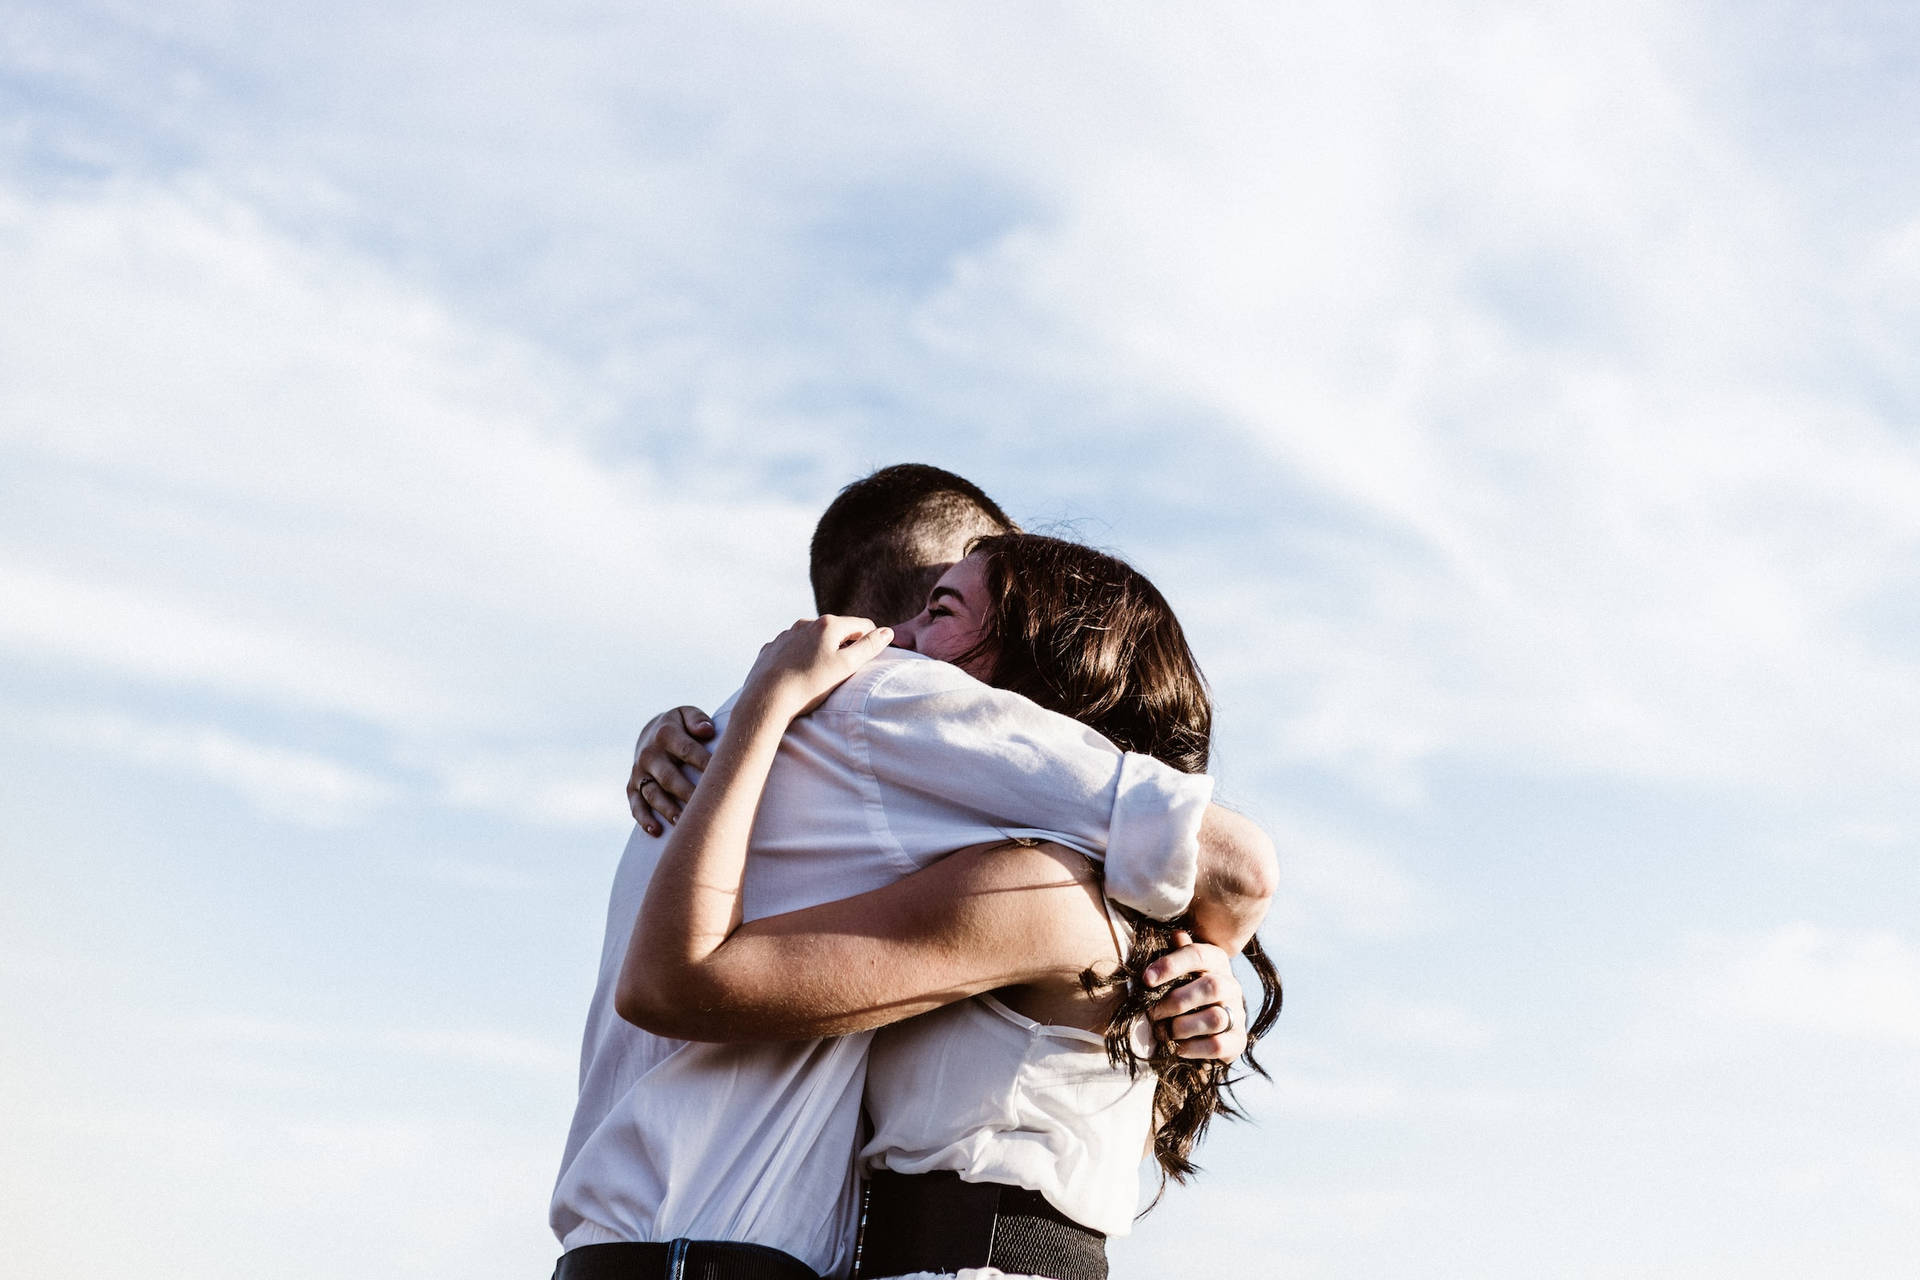 Free Couple Hugging Wallpaper Downloads, [100+] Couple Hugging Wallpapers  for FREE 